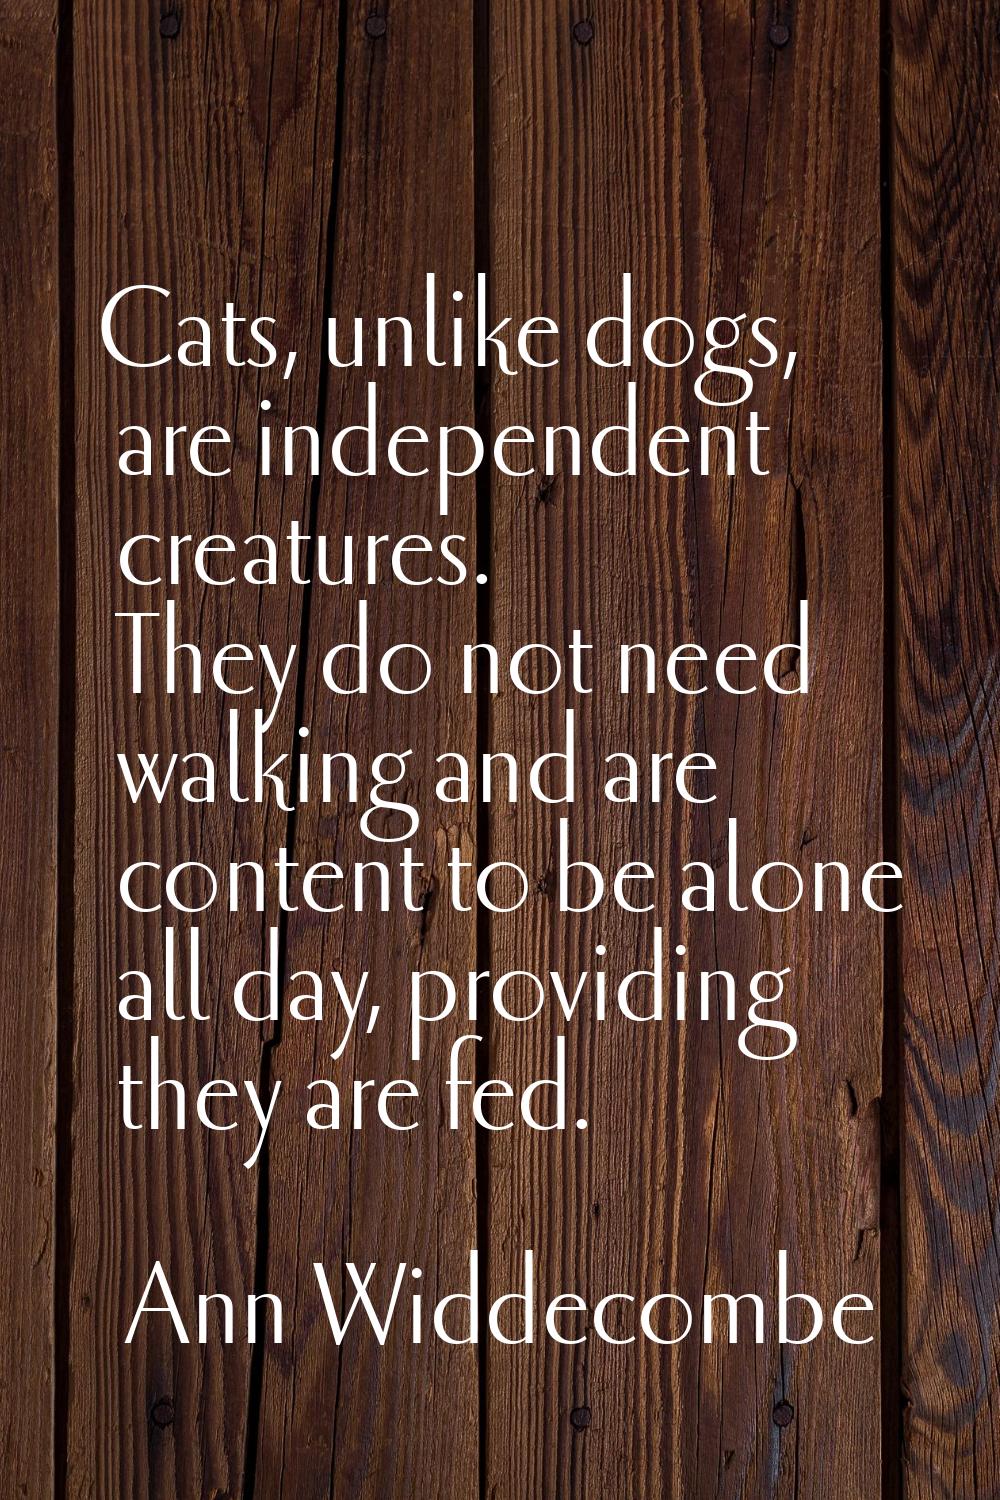 Cats, unlike dogs, are independent creatures. They do not need walking and are content to be alone 